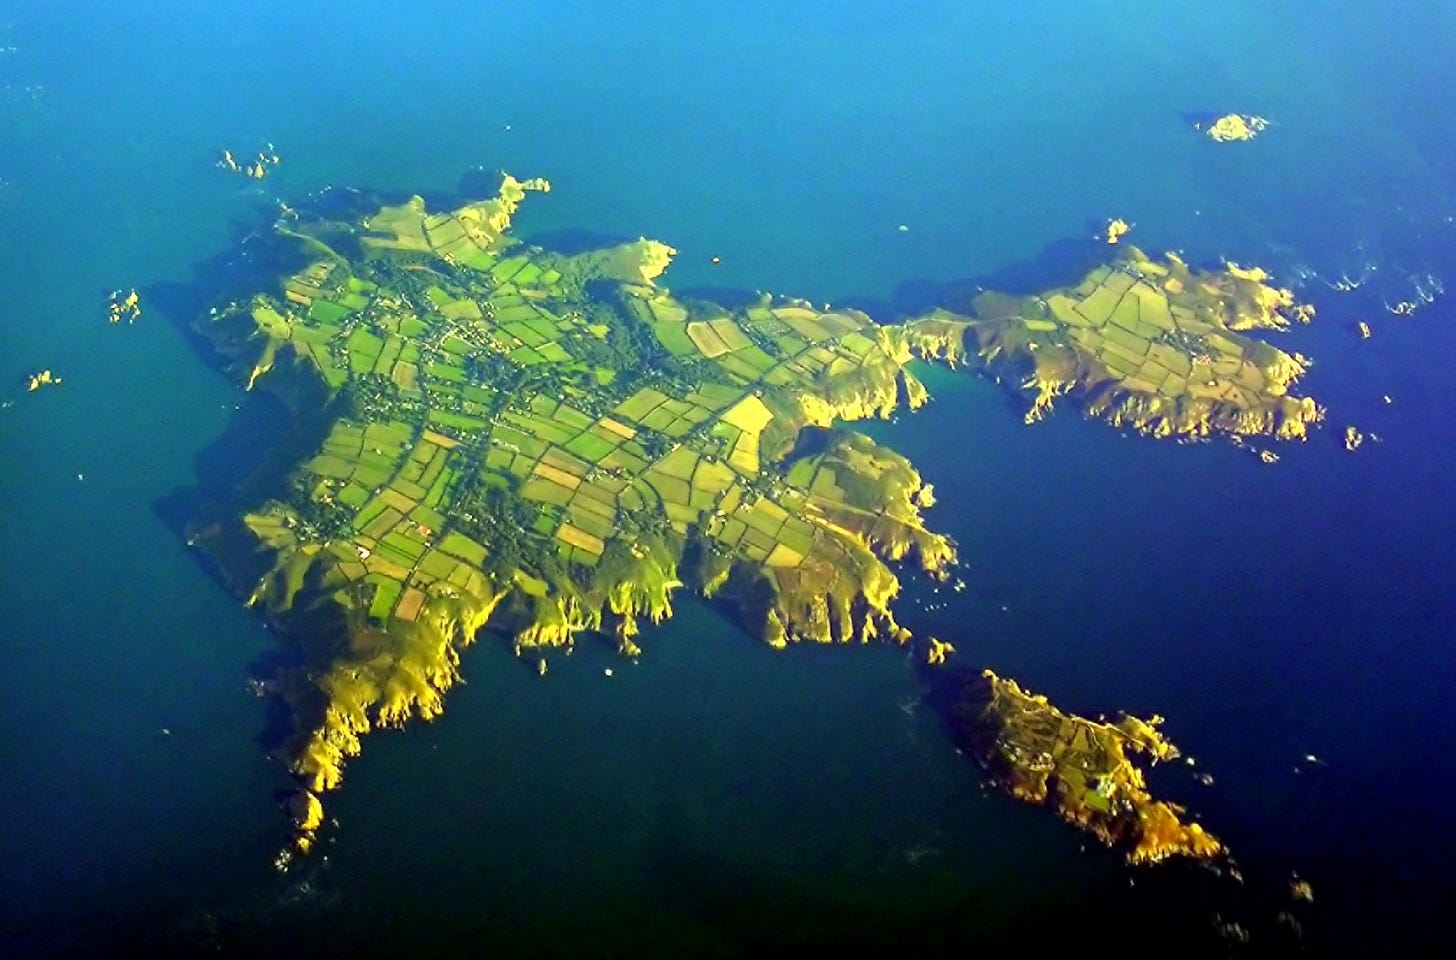 https://upload.wikimedia.org/wikipedia/commons/a/a3/Sark-aerial.jpg